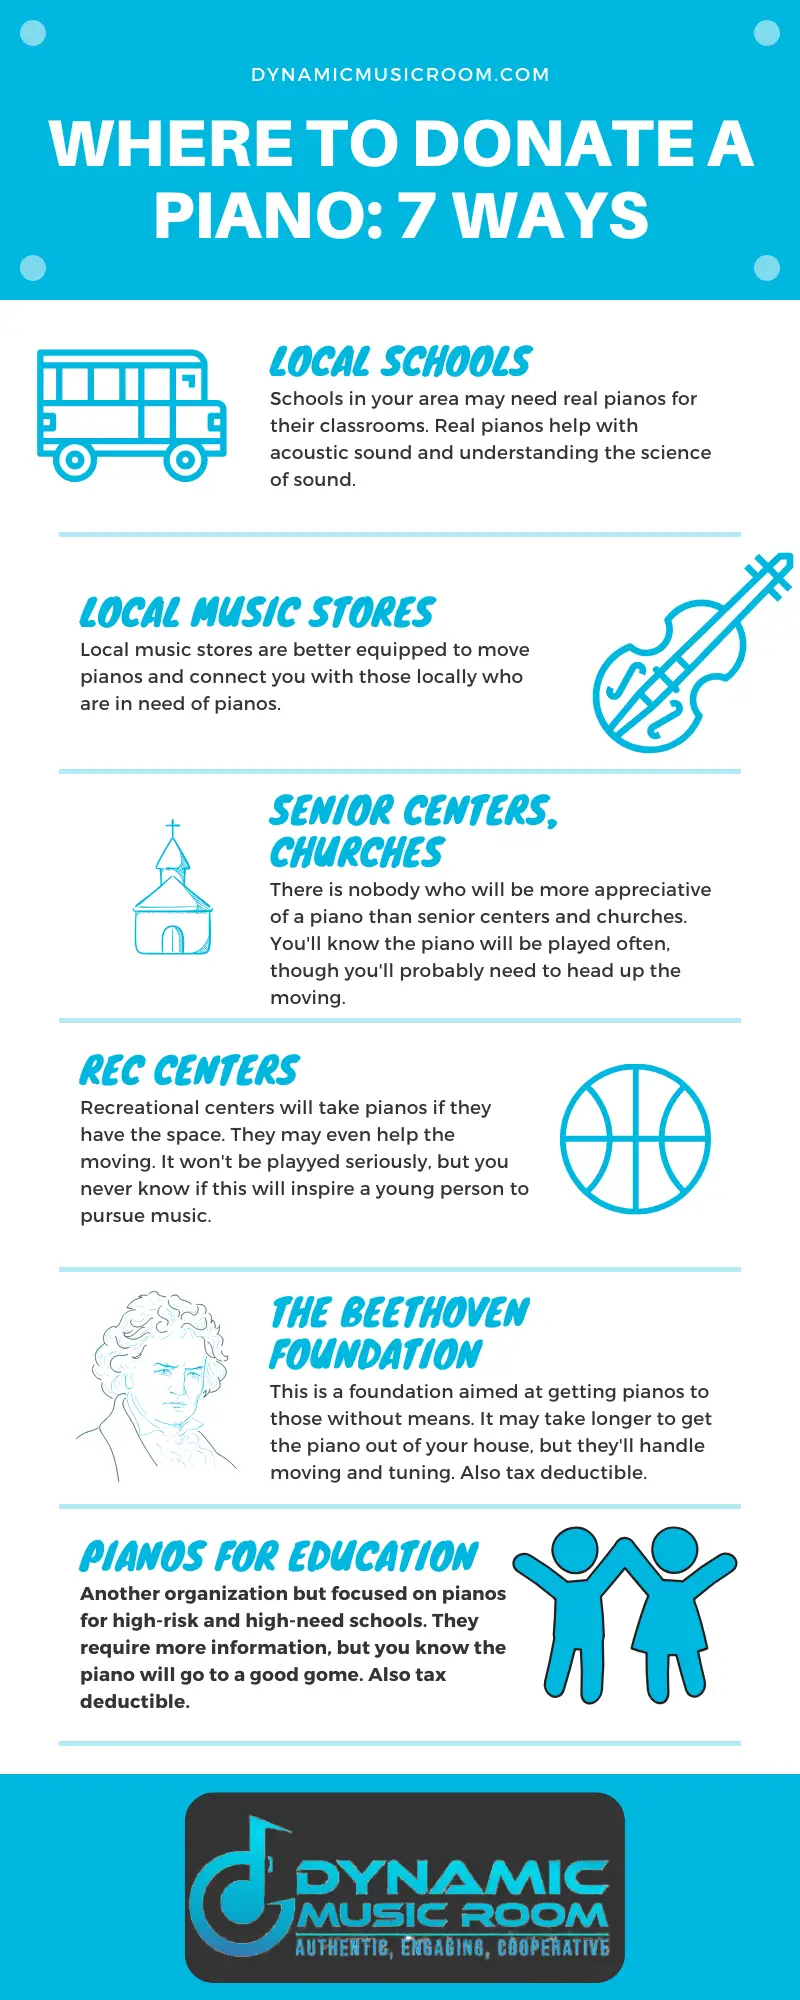 image where to donate a piano: 7 ways infographic